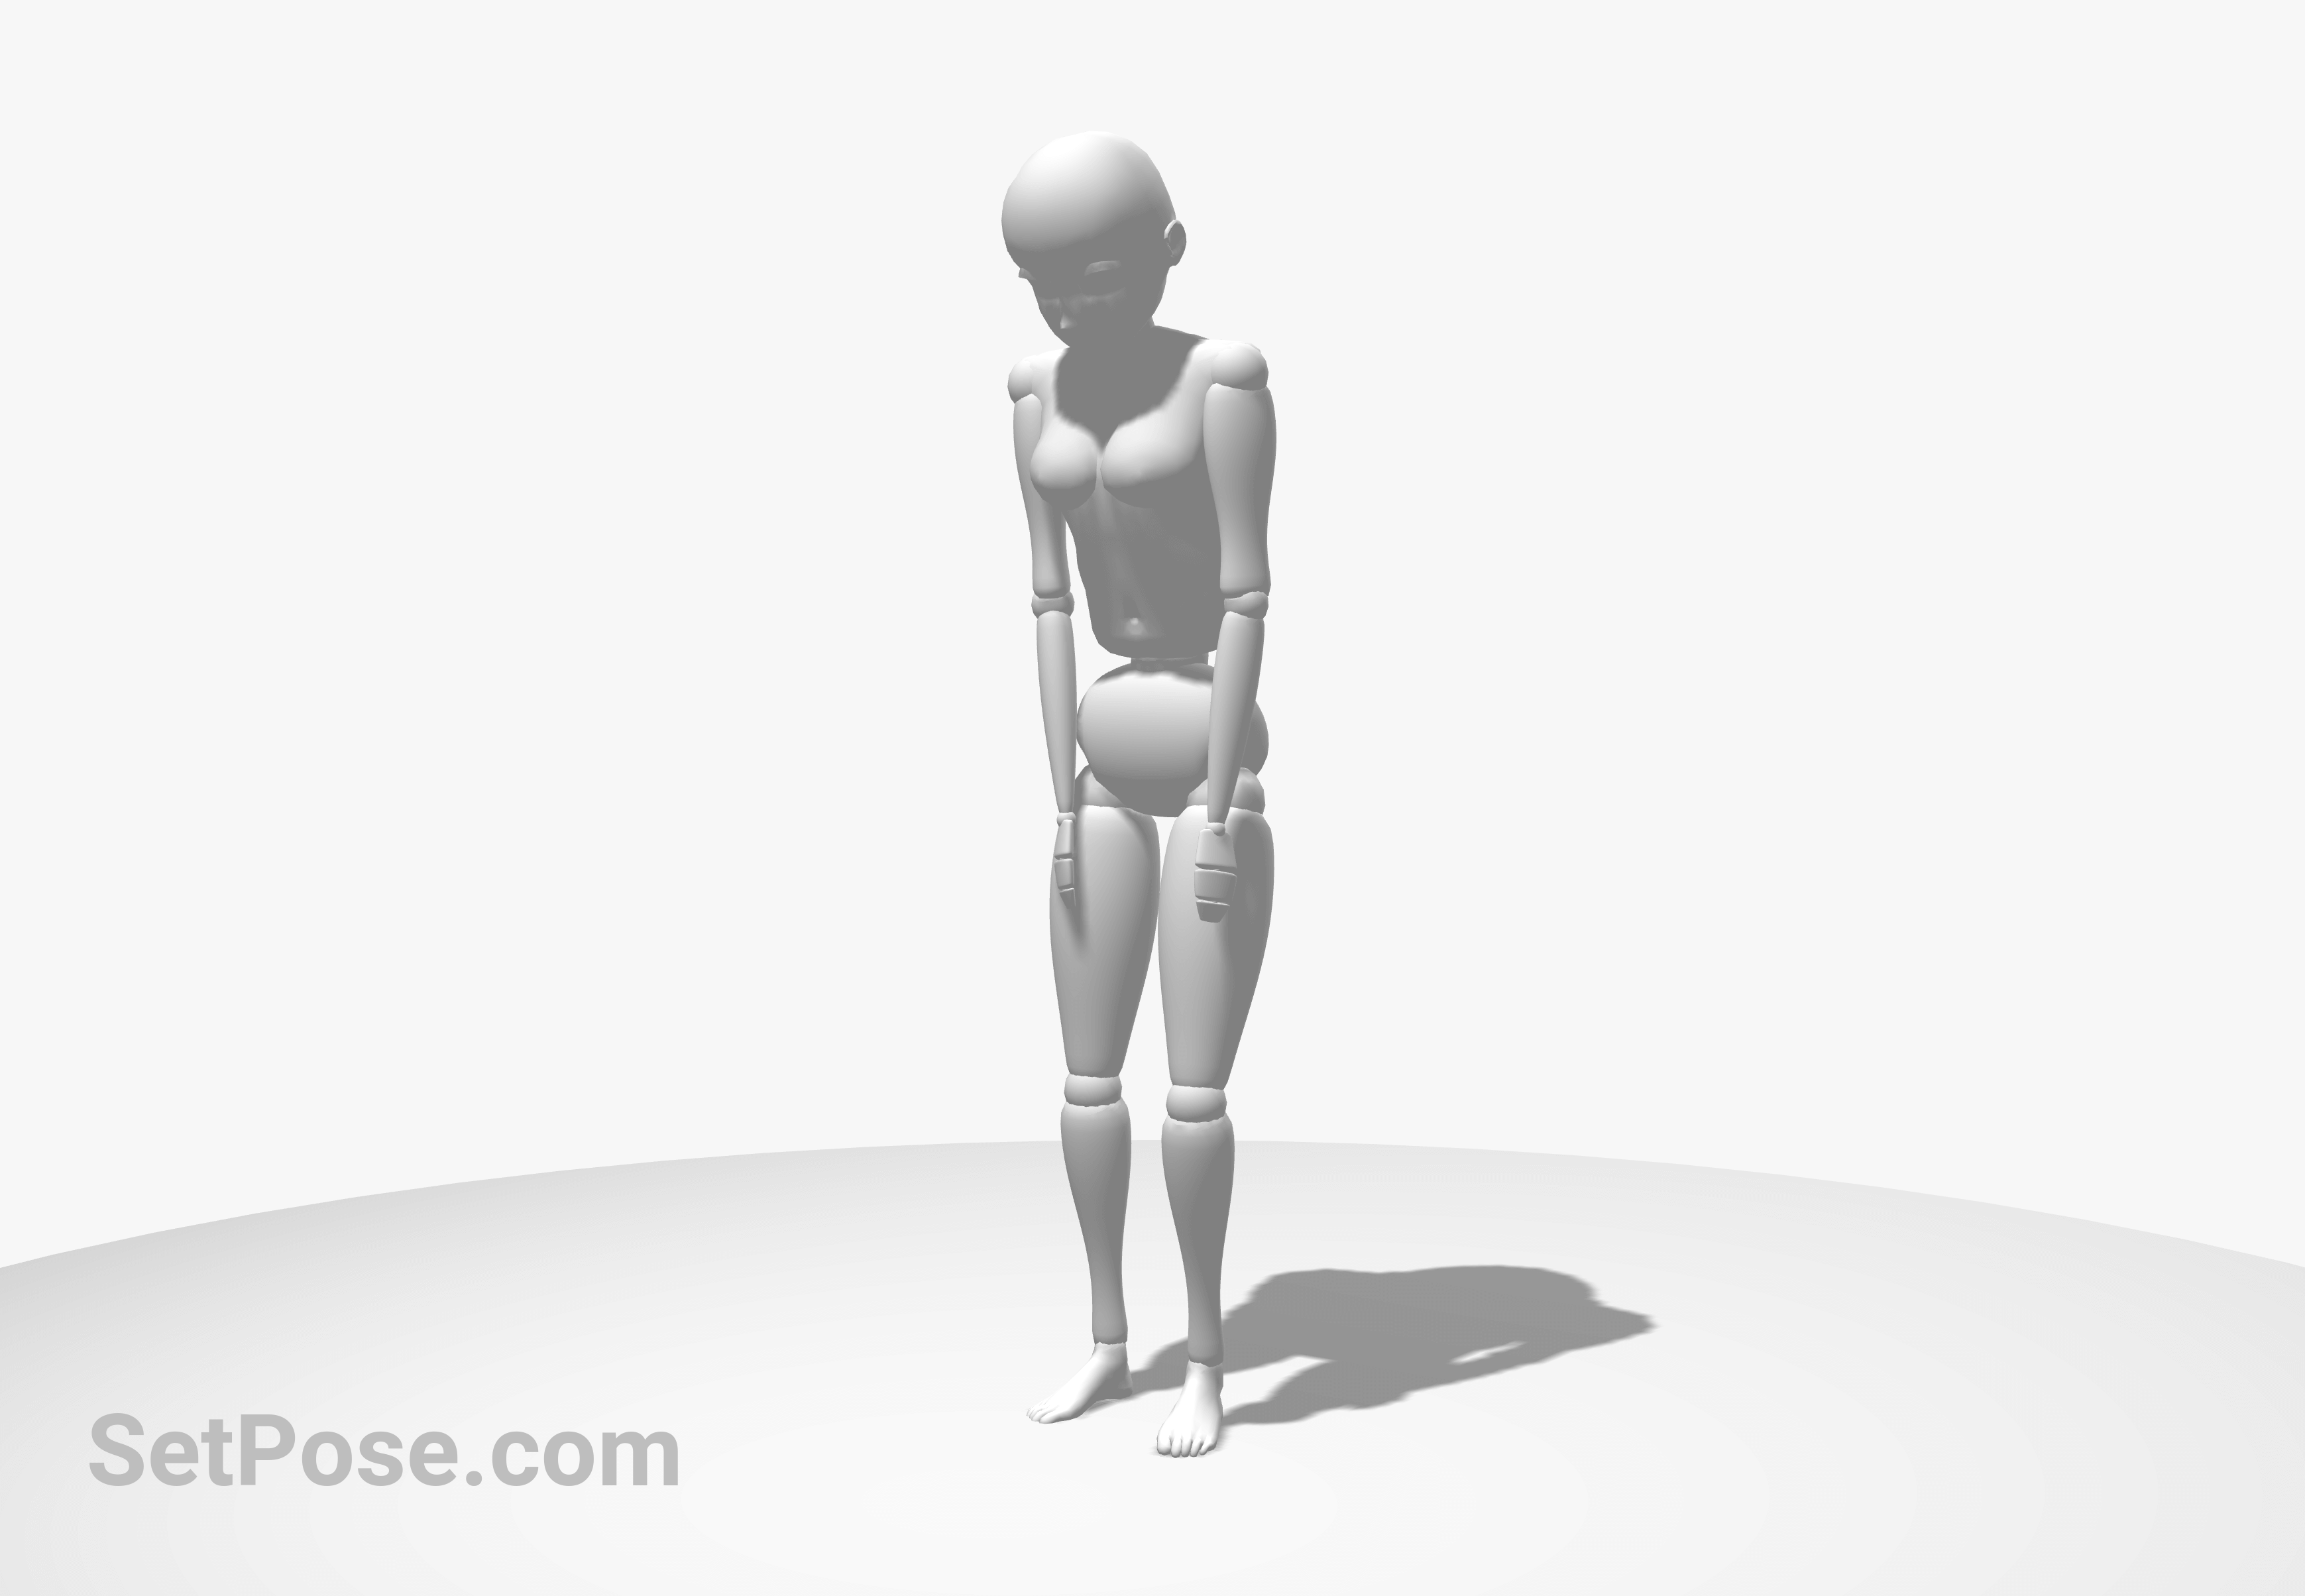 35 Anime Reference Poses for Drawing Editable 3D Model  SetPosecom